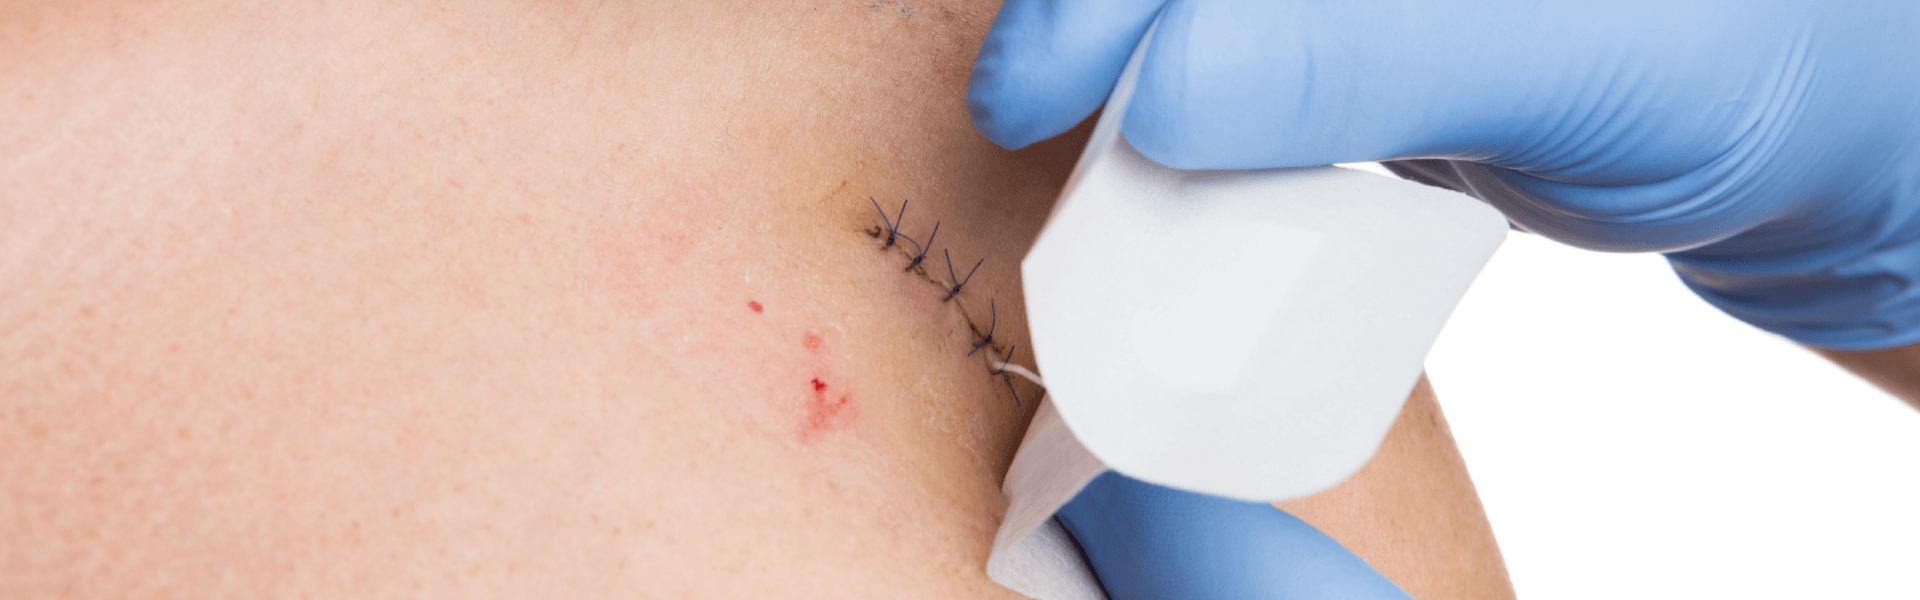 Suture Removal in Patiala